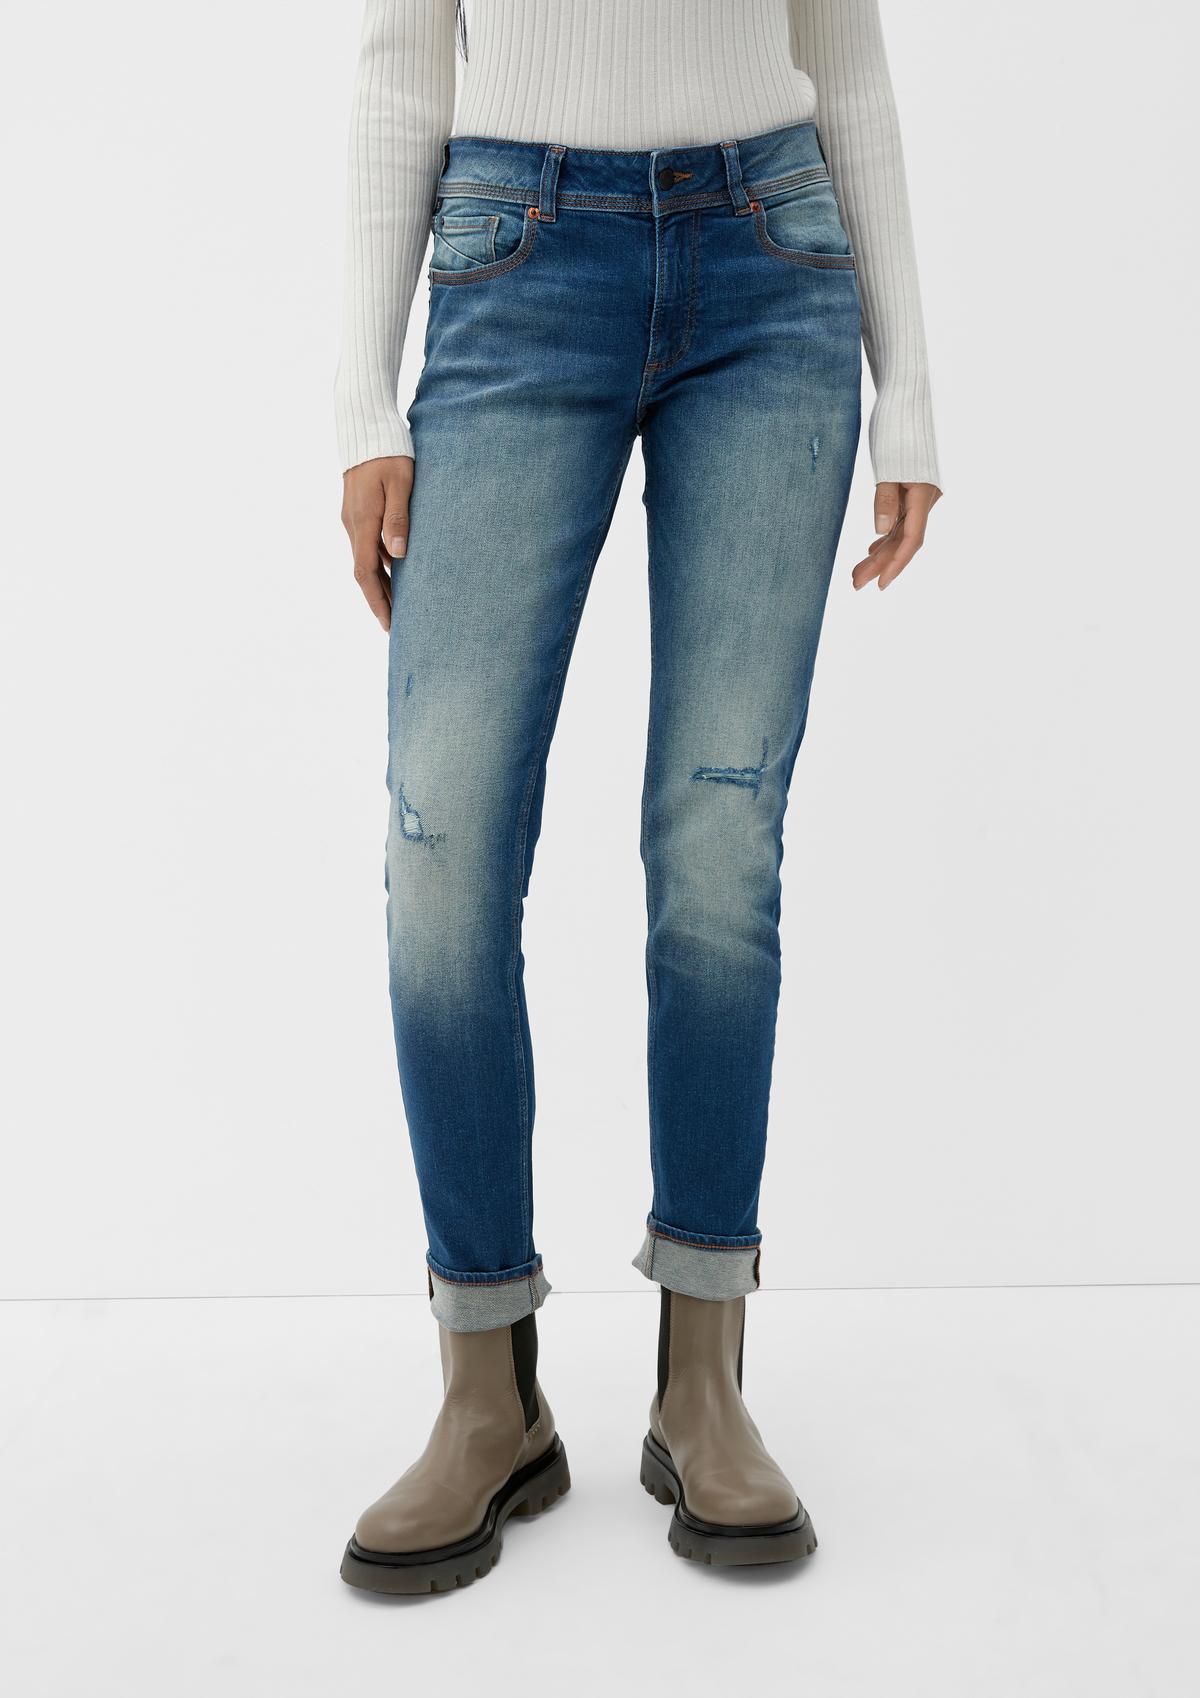 s.Oliver Slim fit: classic blue jeans